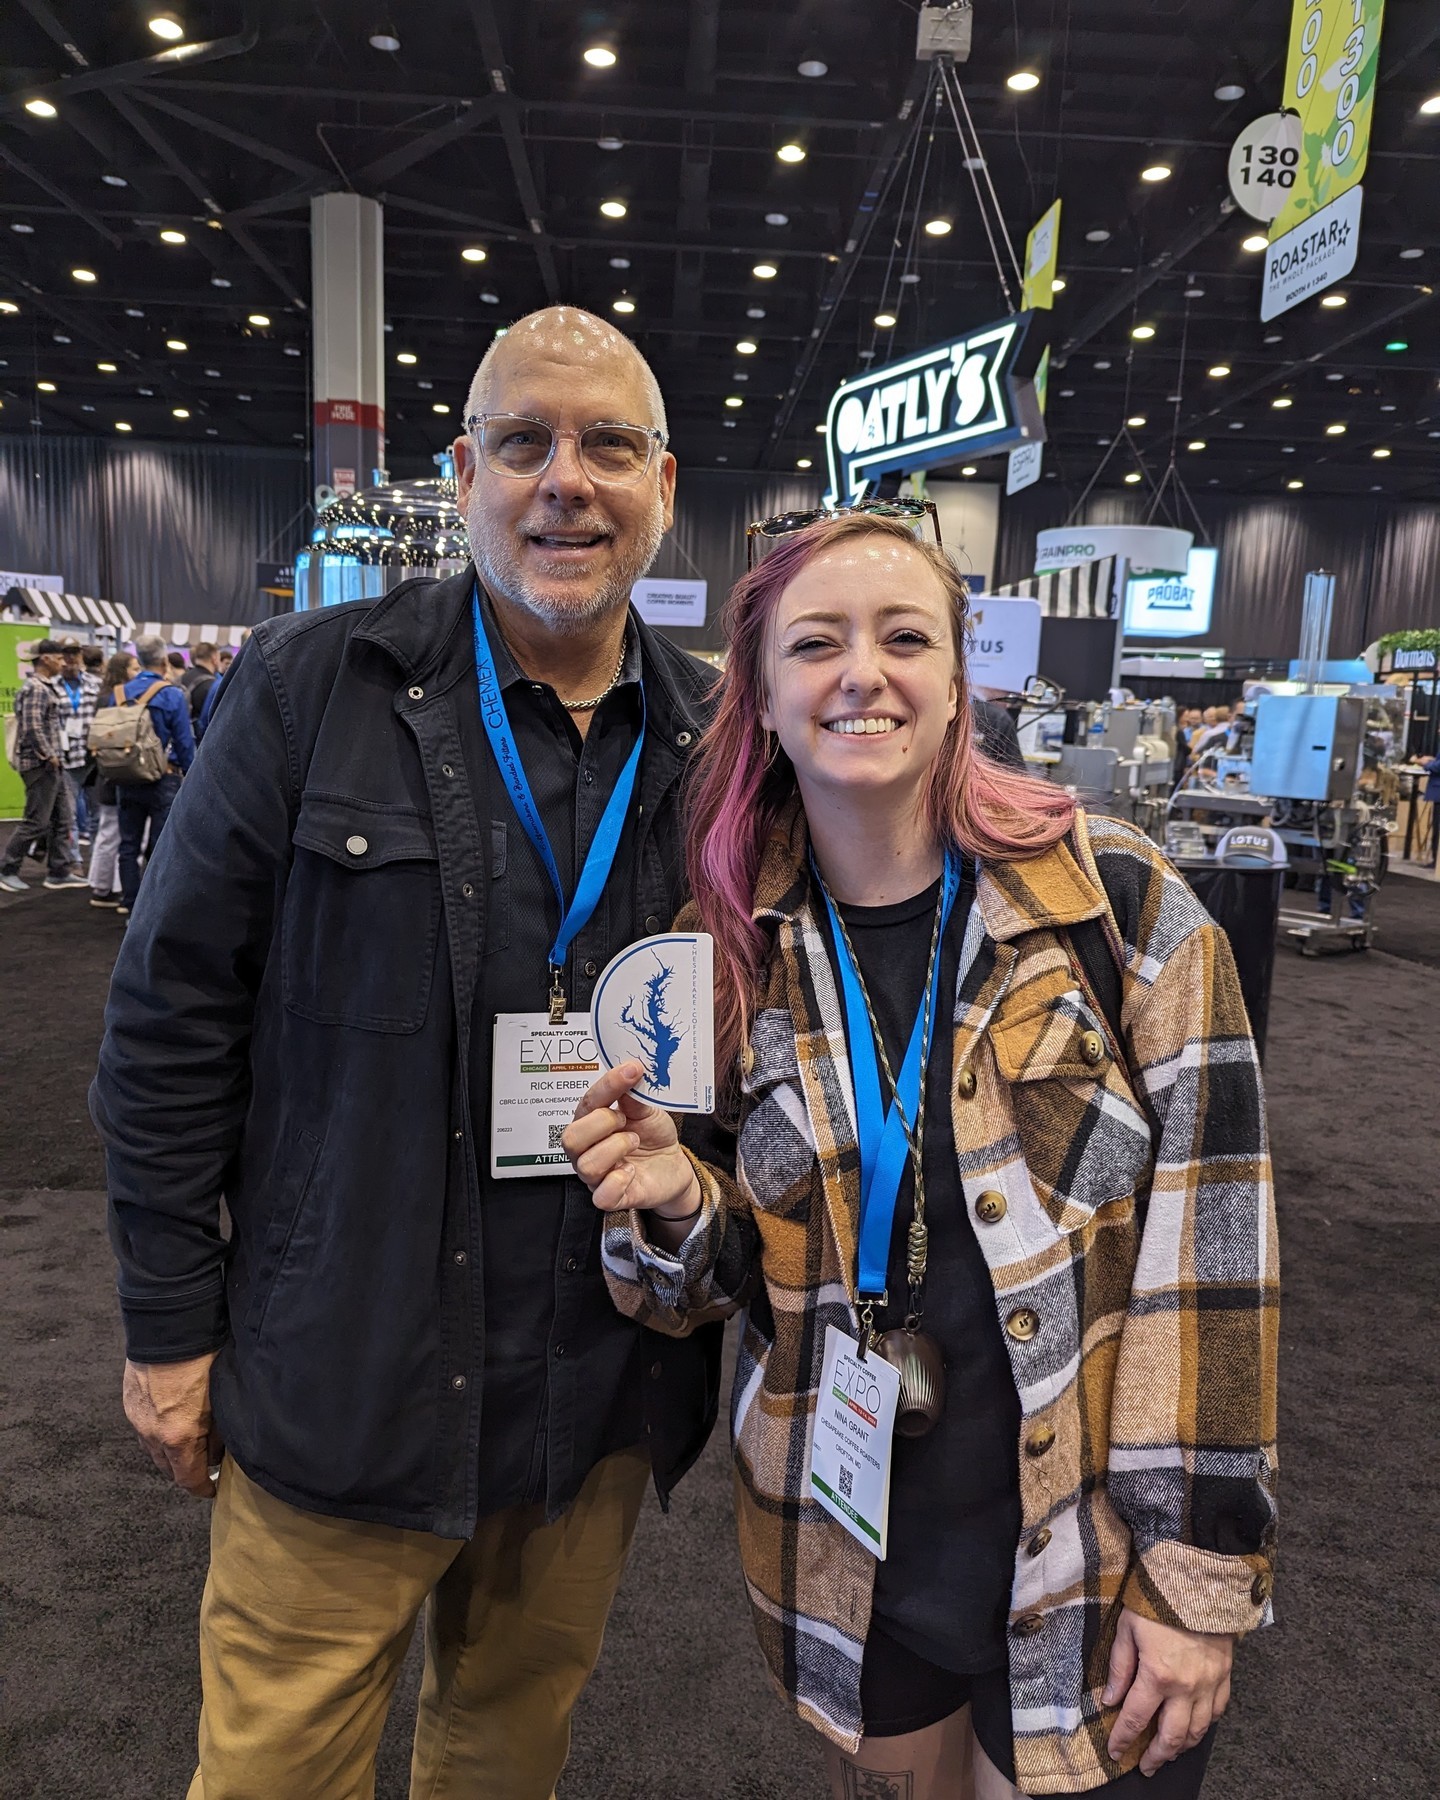 Grateful for all the customers who stopped by our table and showed their support!  Seeing customers proudly holding our products is the ultimate reward. Thank you for choosing us! ⭐

📸 : Nina and Rick from Chesapeake Coffee Roasters

#StickersAndMore
#ElevateYourBrand